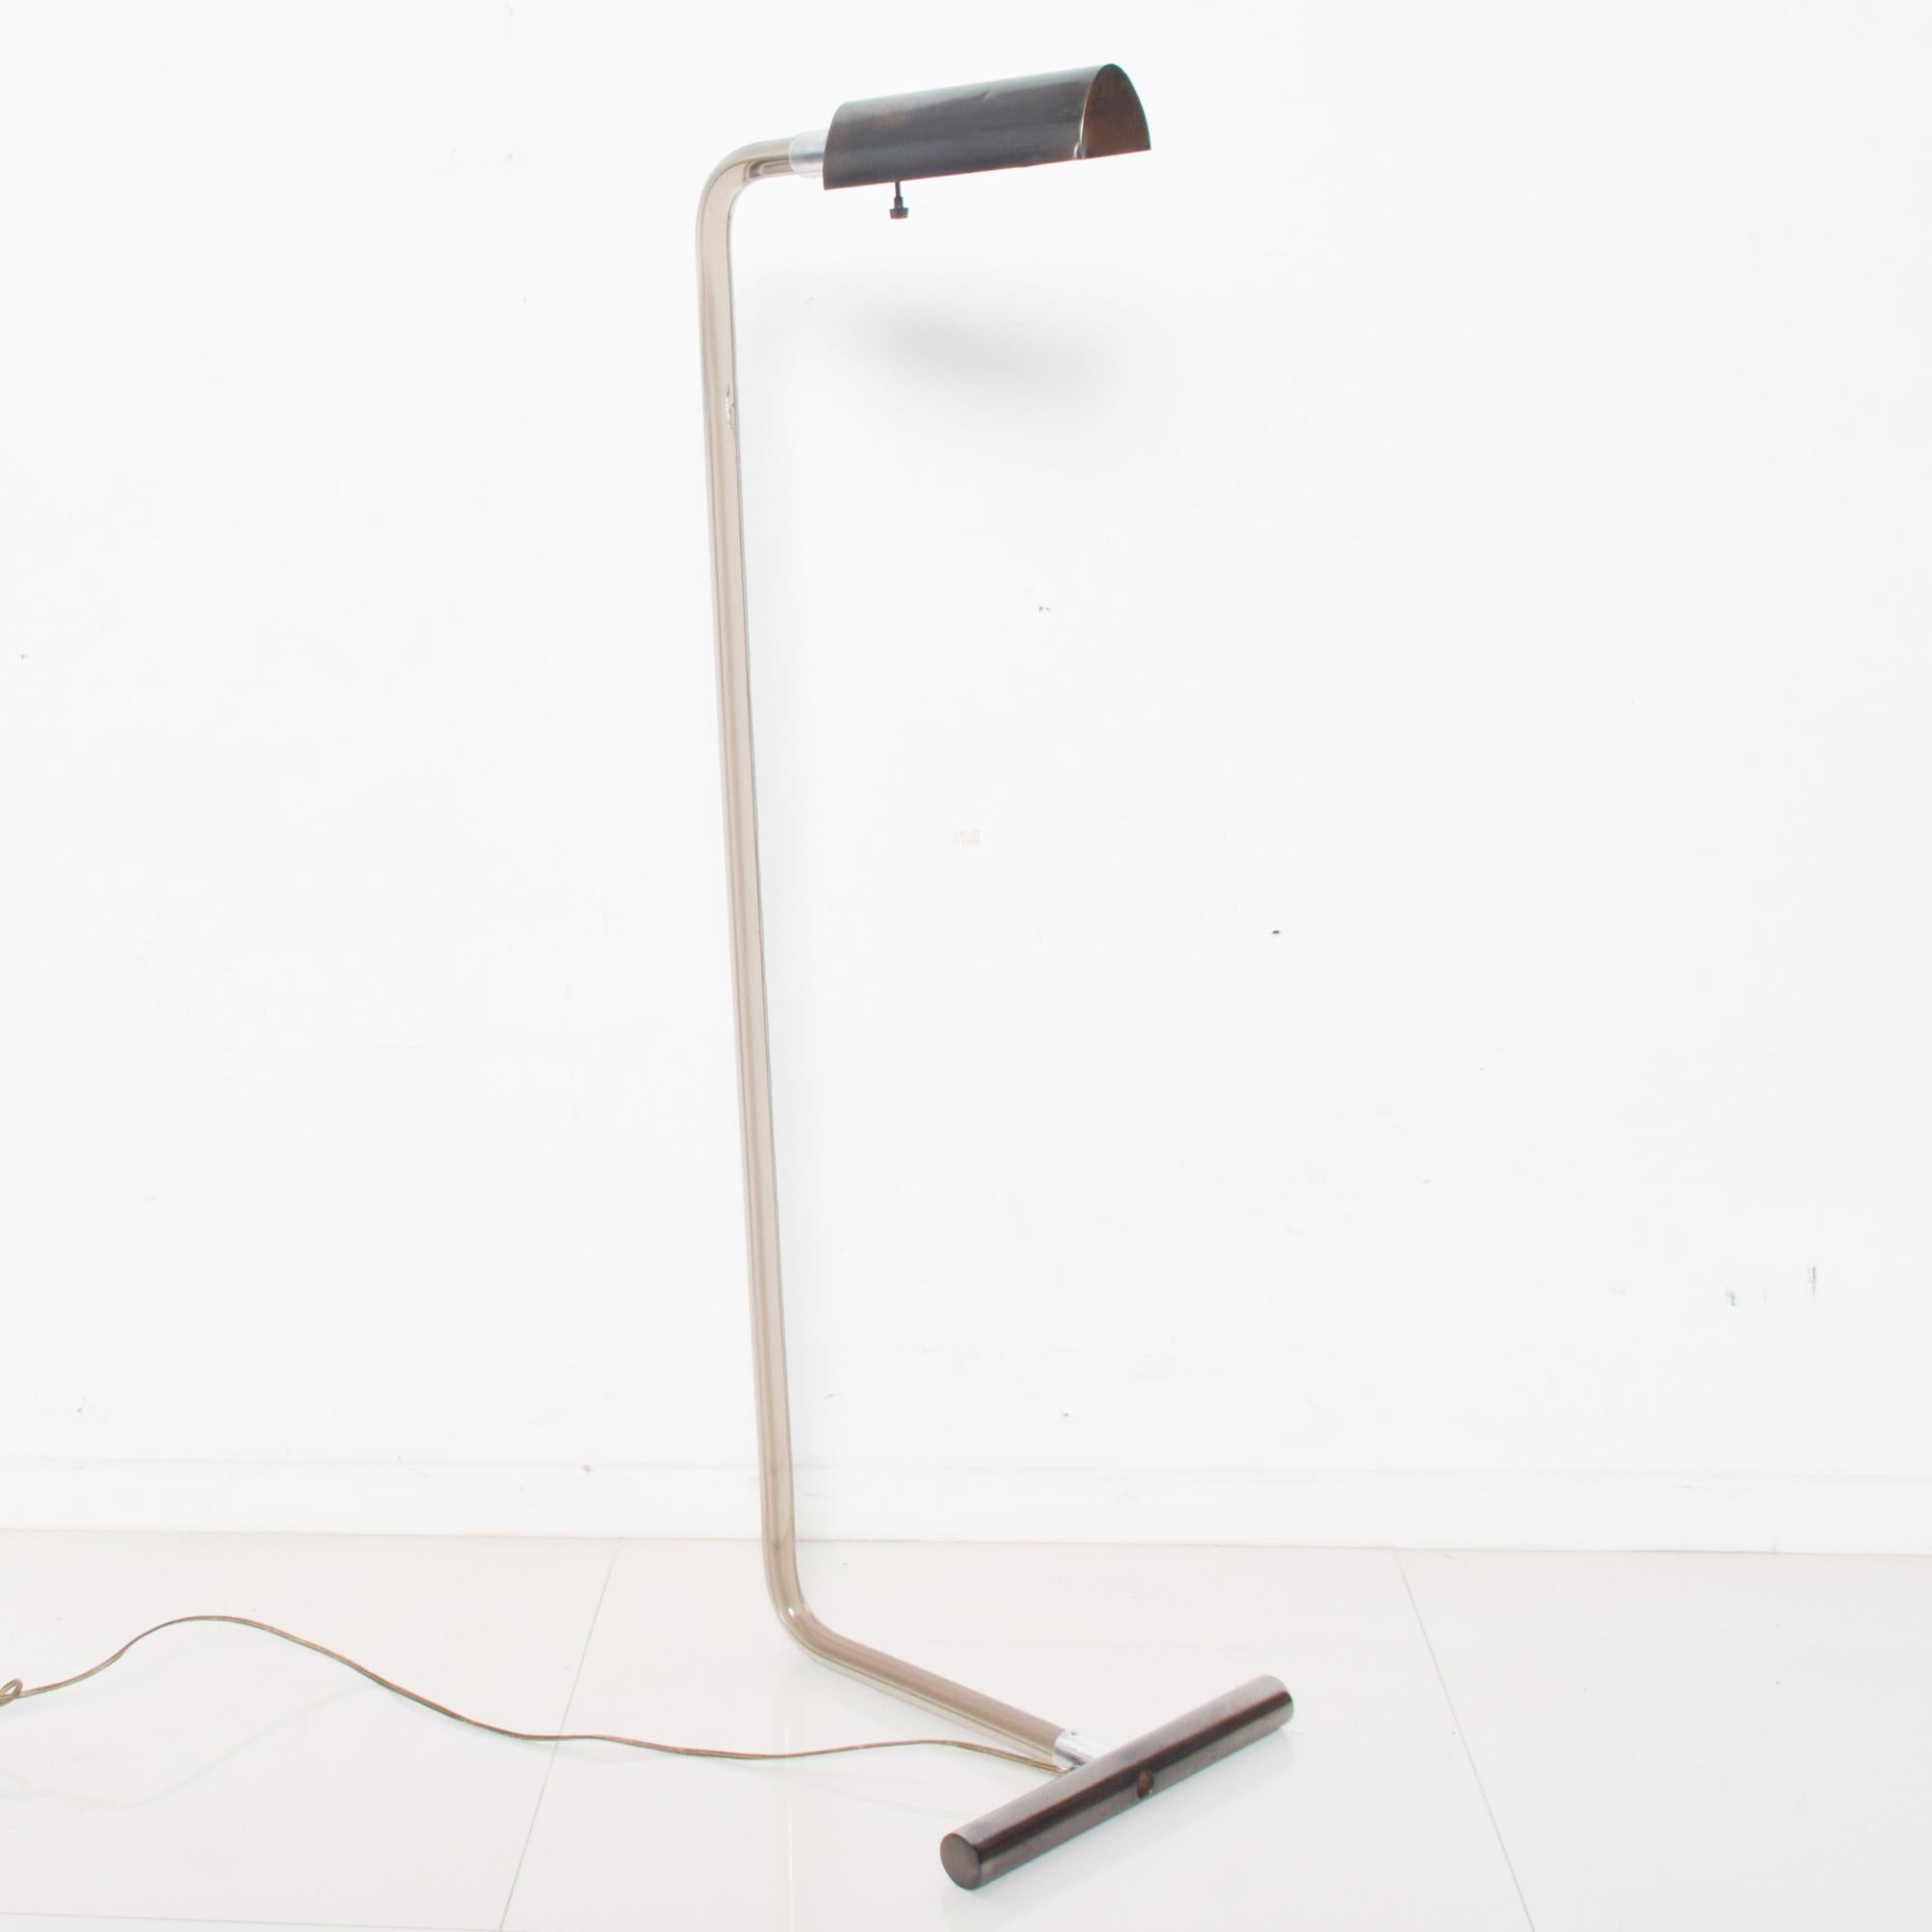 Stylish vintage modern crylicord pharmacy floor lamp in Lucite by Peter Hamburger produced by Kovacs for Knoll. Made in France, 1970s.
Patinated rubbed bronze finish-we must mention a small break on the Lucite. Please see our images. 
Beautifully